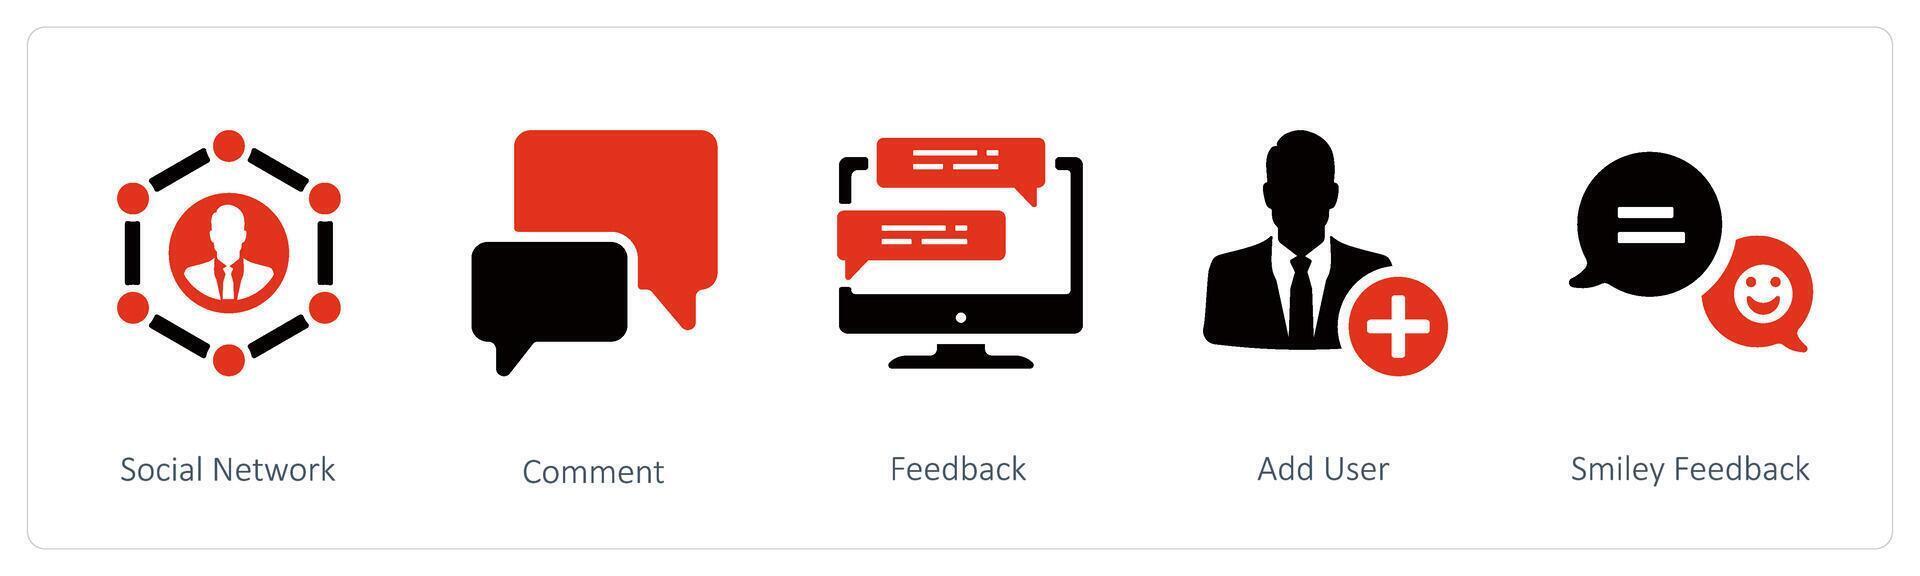 Social Network, comment and feedback vector